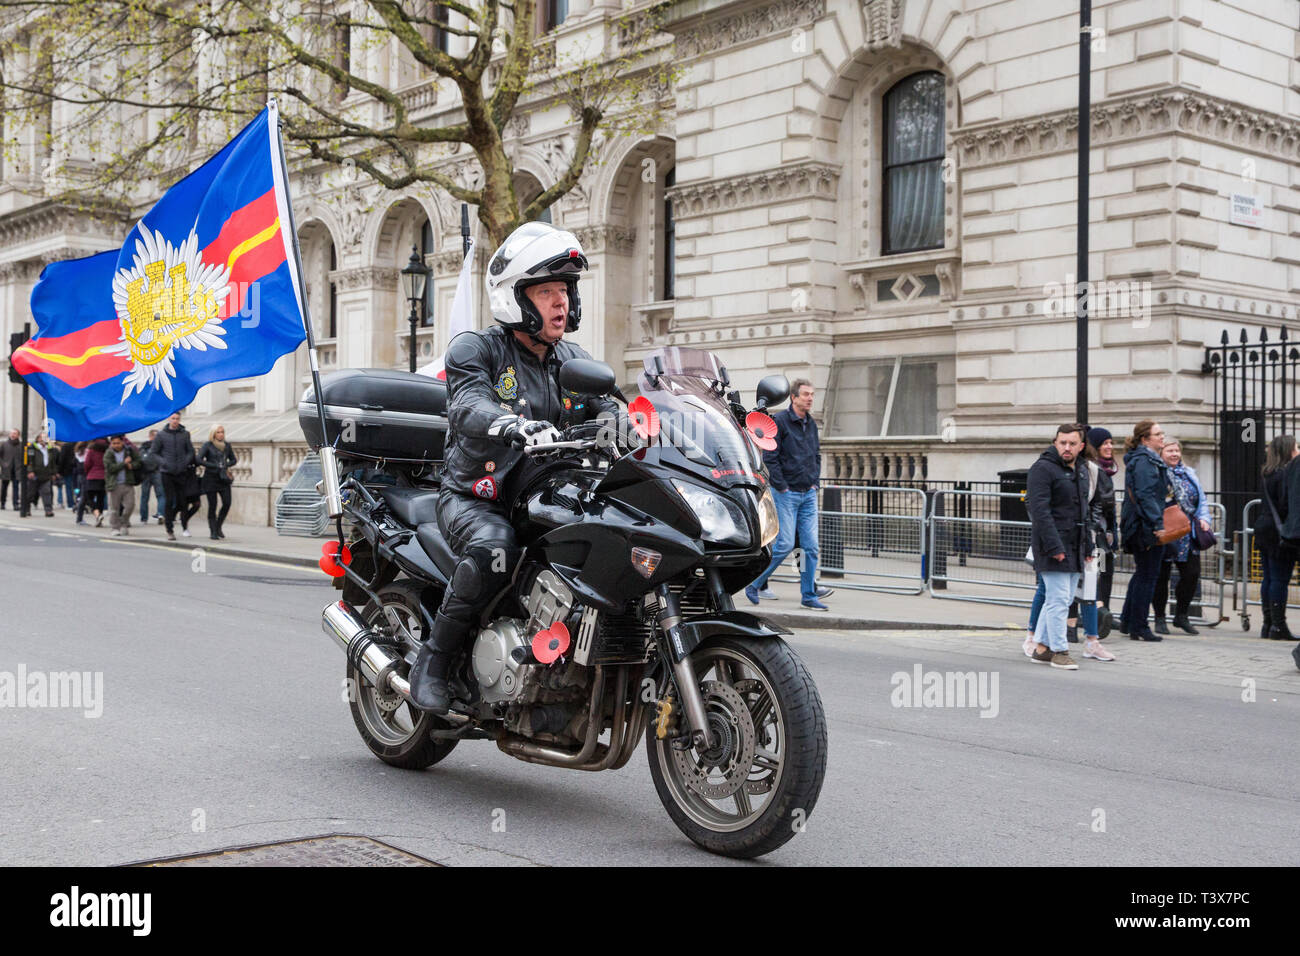 London, UK. 12th April 2019. Bikers in Whitehall attend the Rolling Thunder Ride for Soldier F organised by Harry Wragg and other armed forces veterans in support of the 77-year-old former soldier known as Soldier F who is to be prosecuted for the murders of James Wray and William McKinney at a civil rights march in Londonderry on Bloody Sunday in 1972. Credit: Mark Kerrison/Alamy Live News Stock Photo